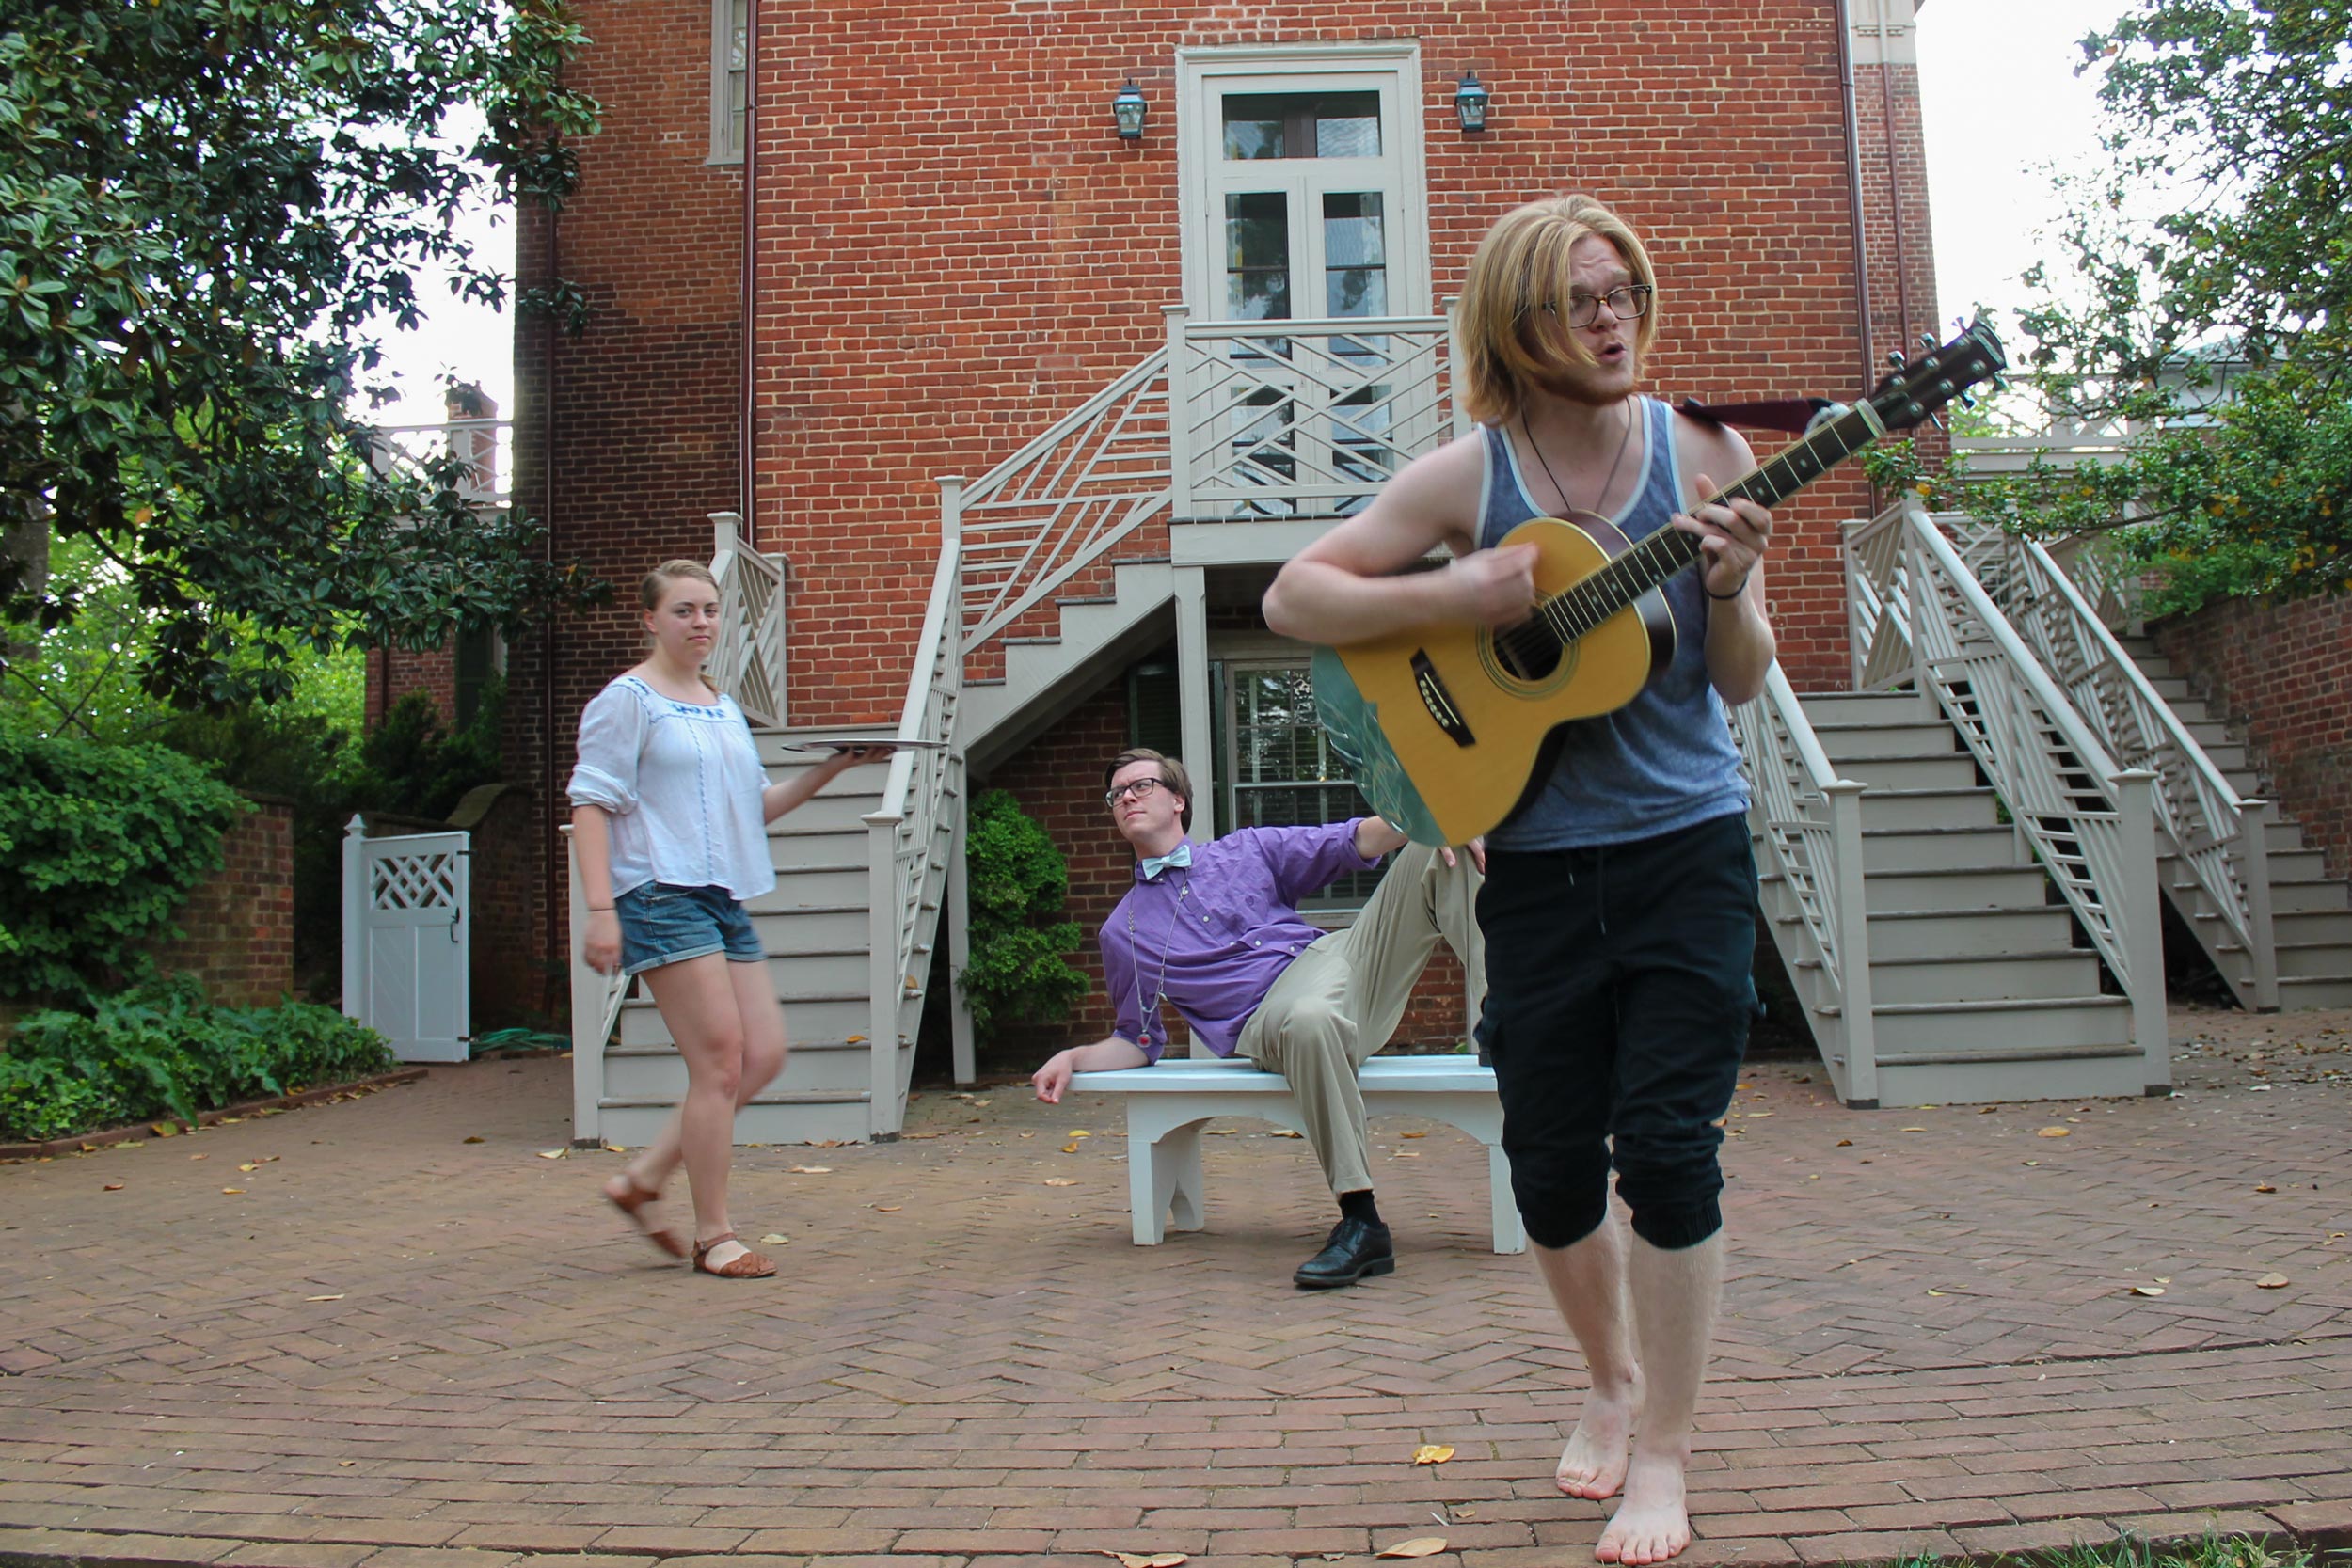  Annika Schunn, Pete Hanner and Nick Hurst outside of a building playing a guitar and acting